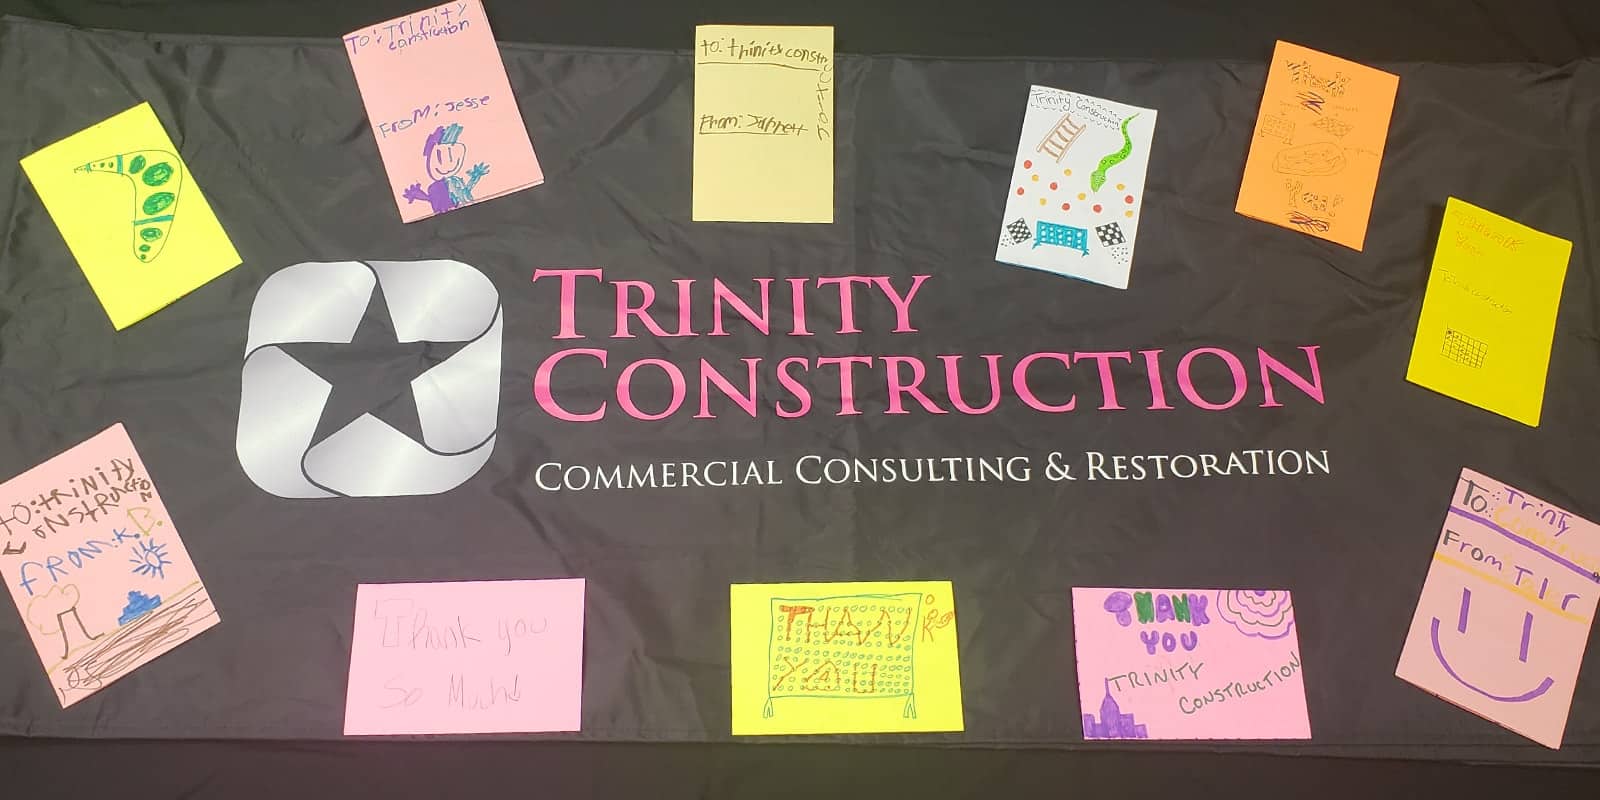 Thank you cards made by kids on a Trinity Construction commercial Consulting and restoration banner